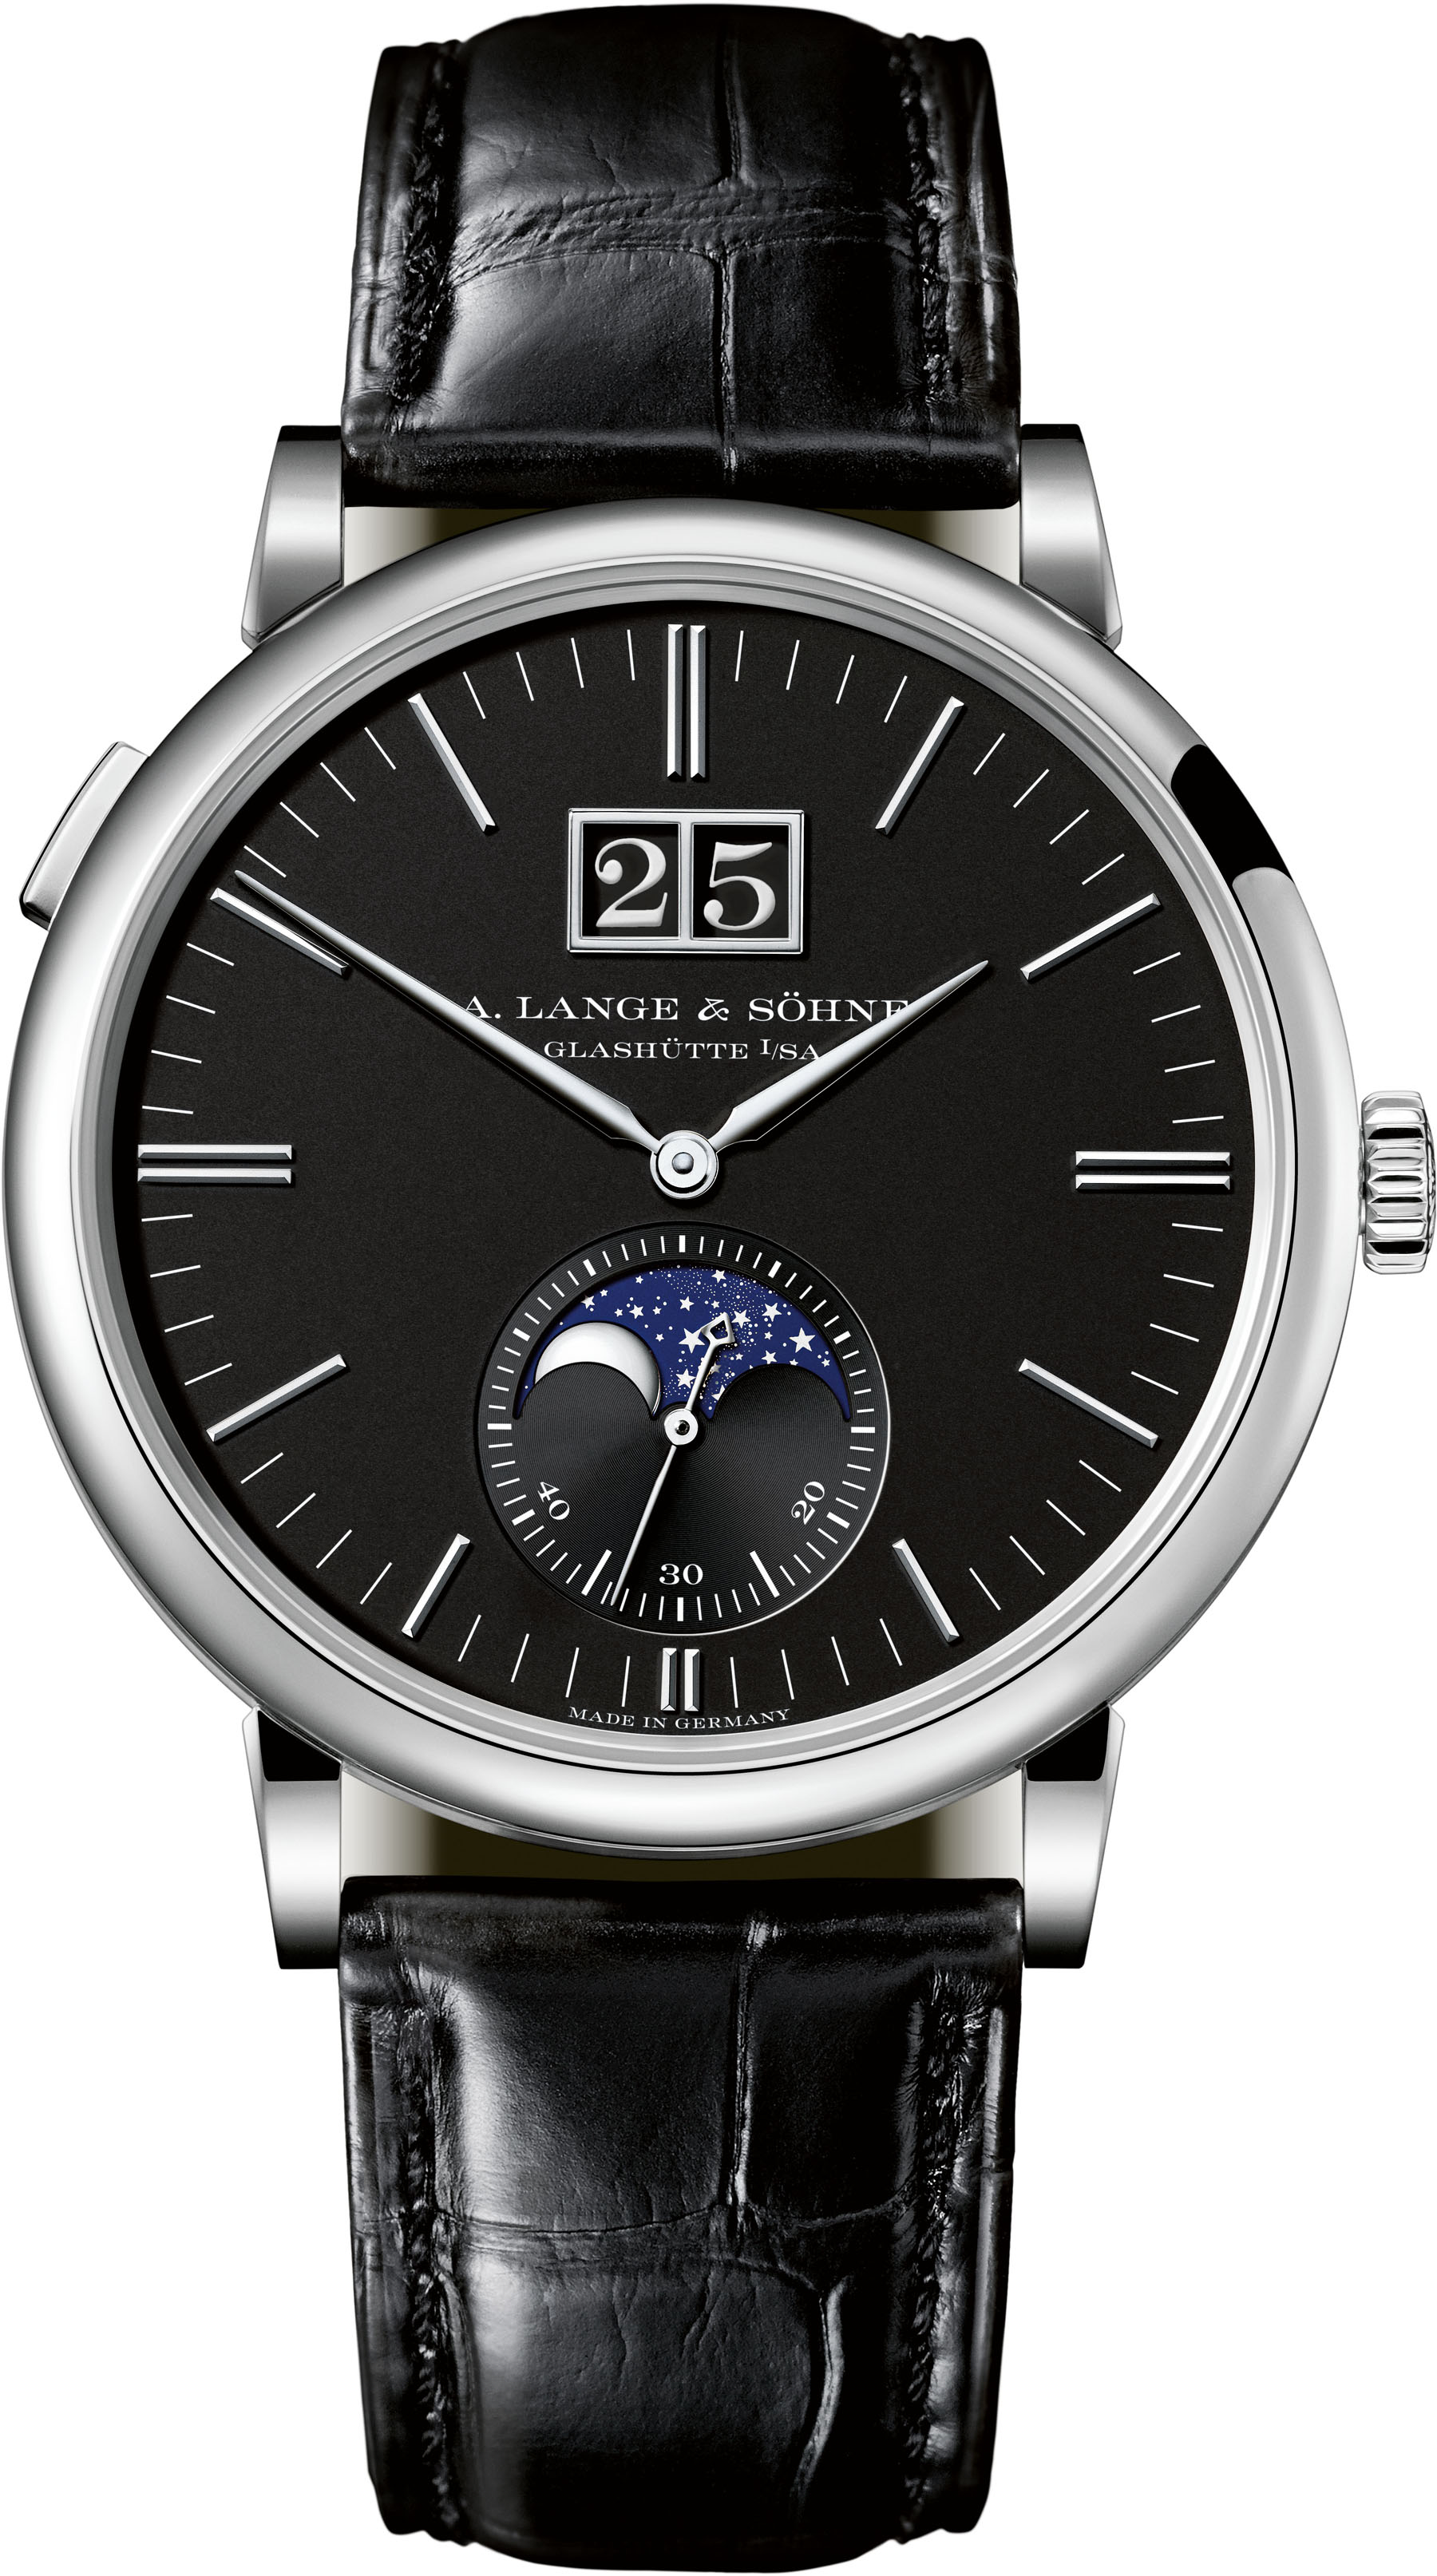 Saxonia Moonphase in white-gold with black dial